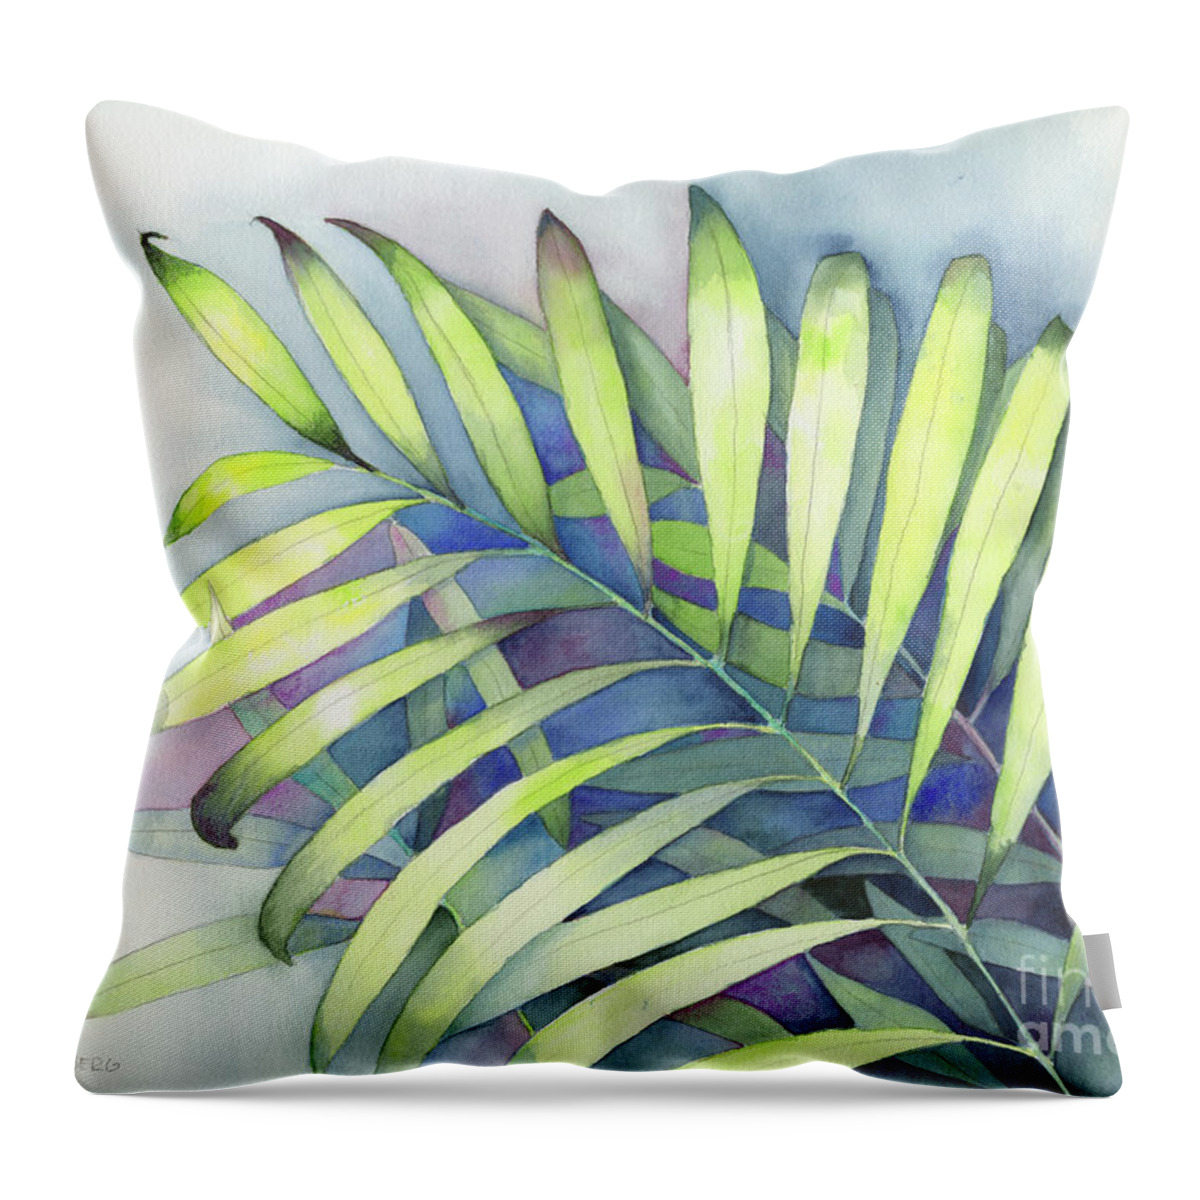 Face Mask Throw Pillow featuring the painting Serenity Palm Study by Lois Blasberg